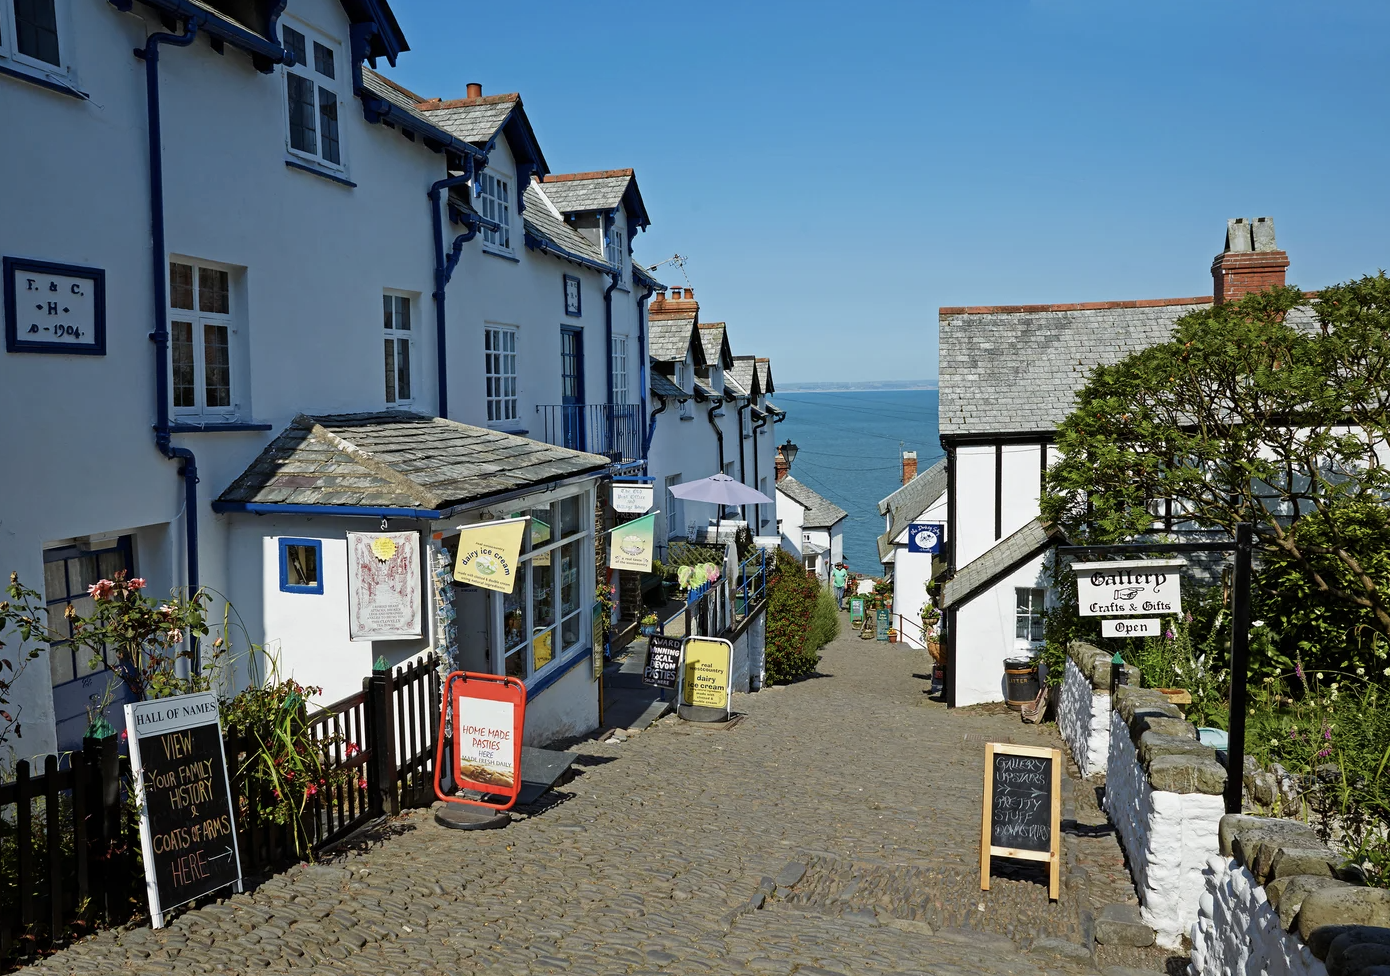 Clovelly named one of the “14 of the best car-free destinations for your next holiday” – The Points Guy